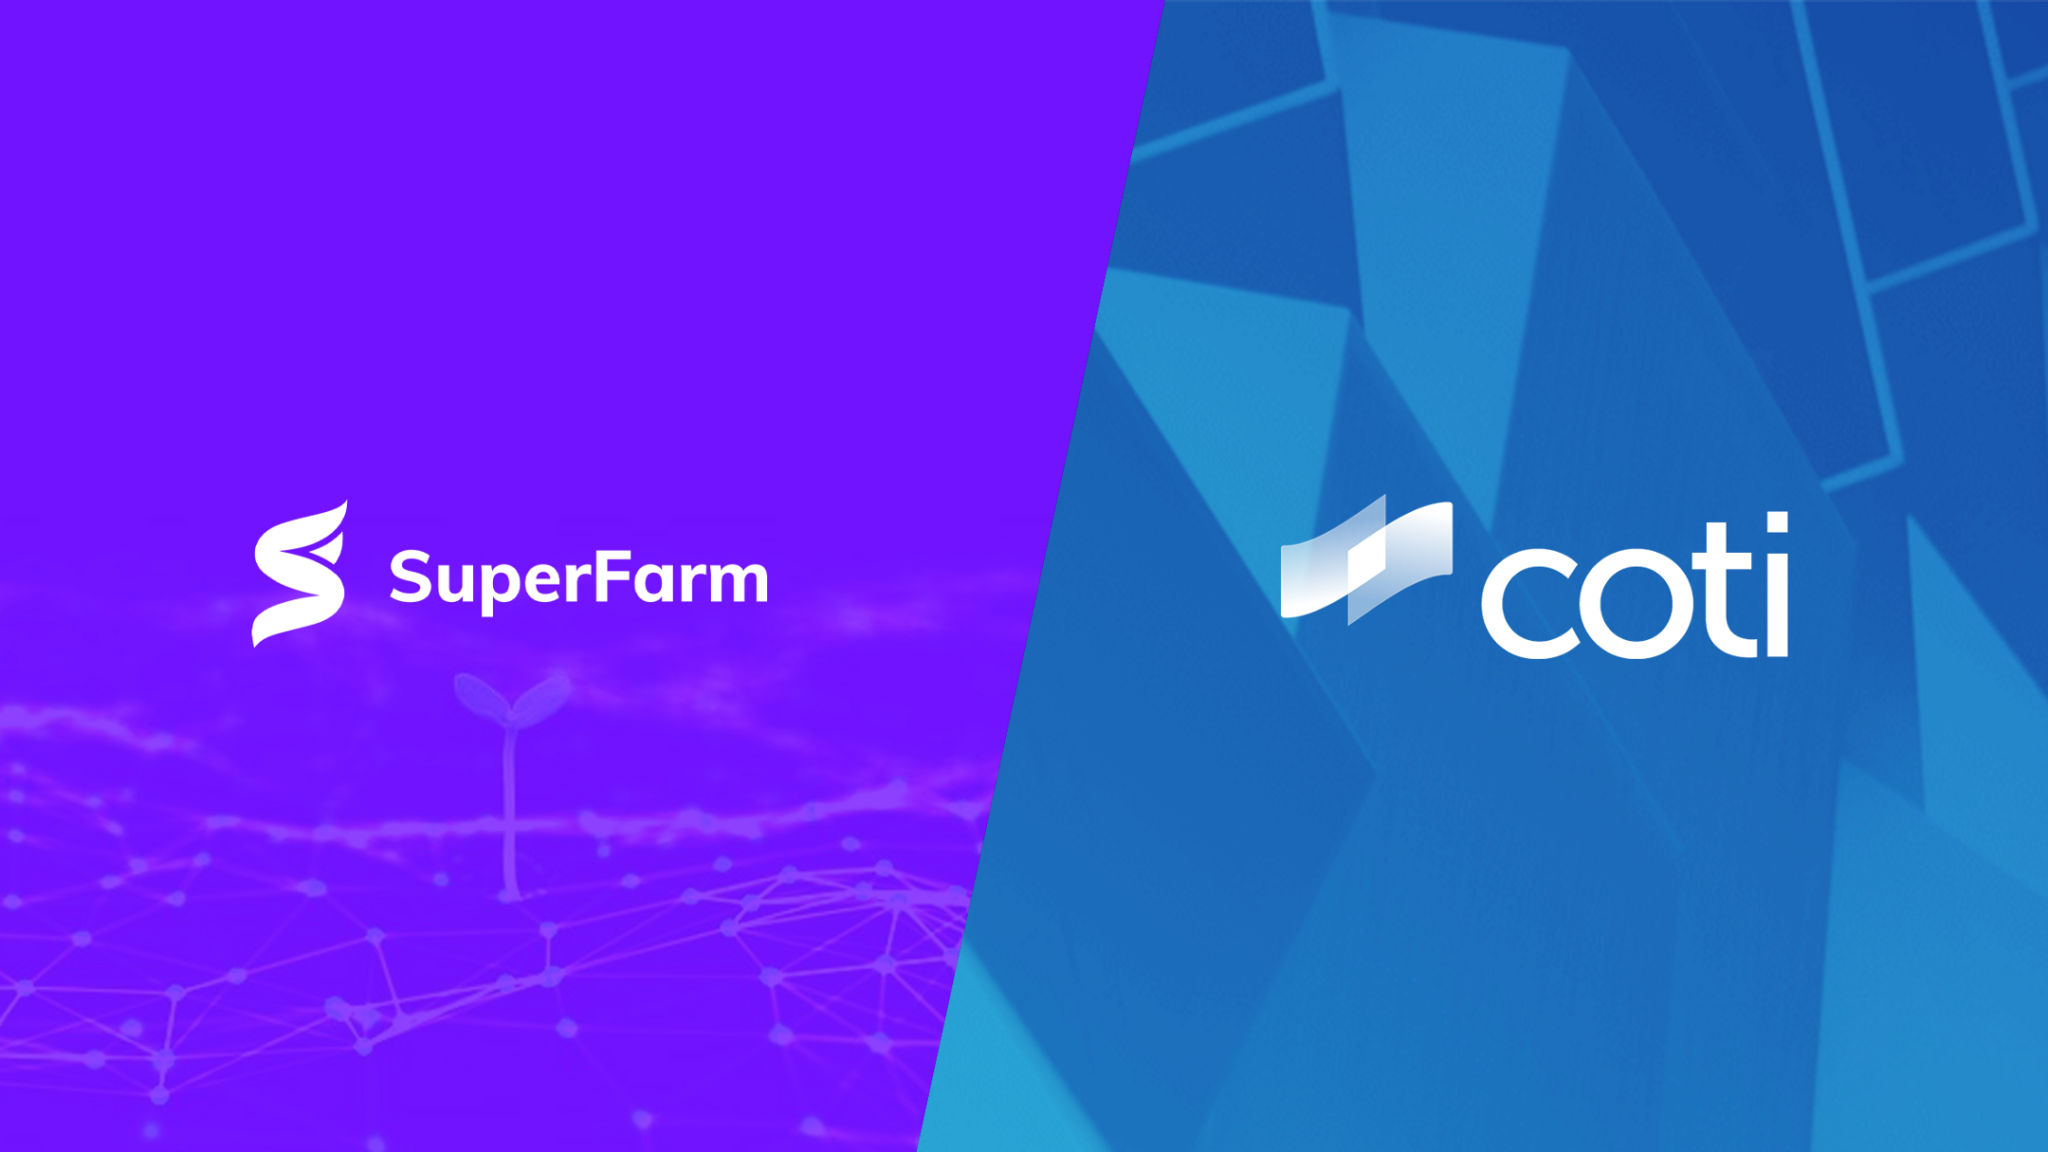 SuperFarm collaborated with COTI as an exclusive NFT ...